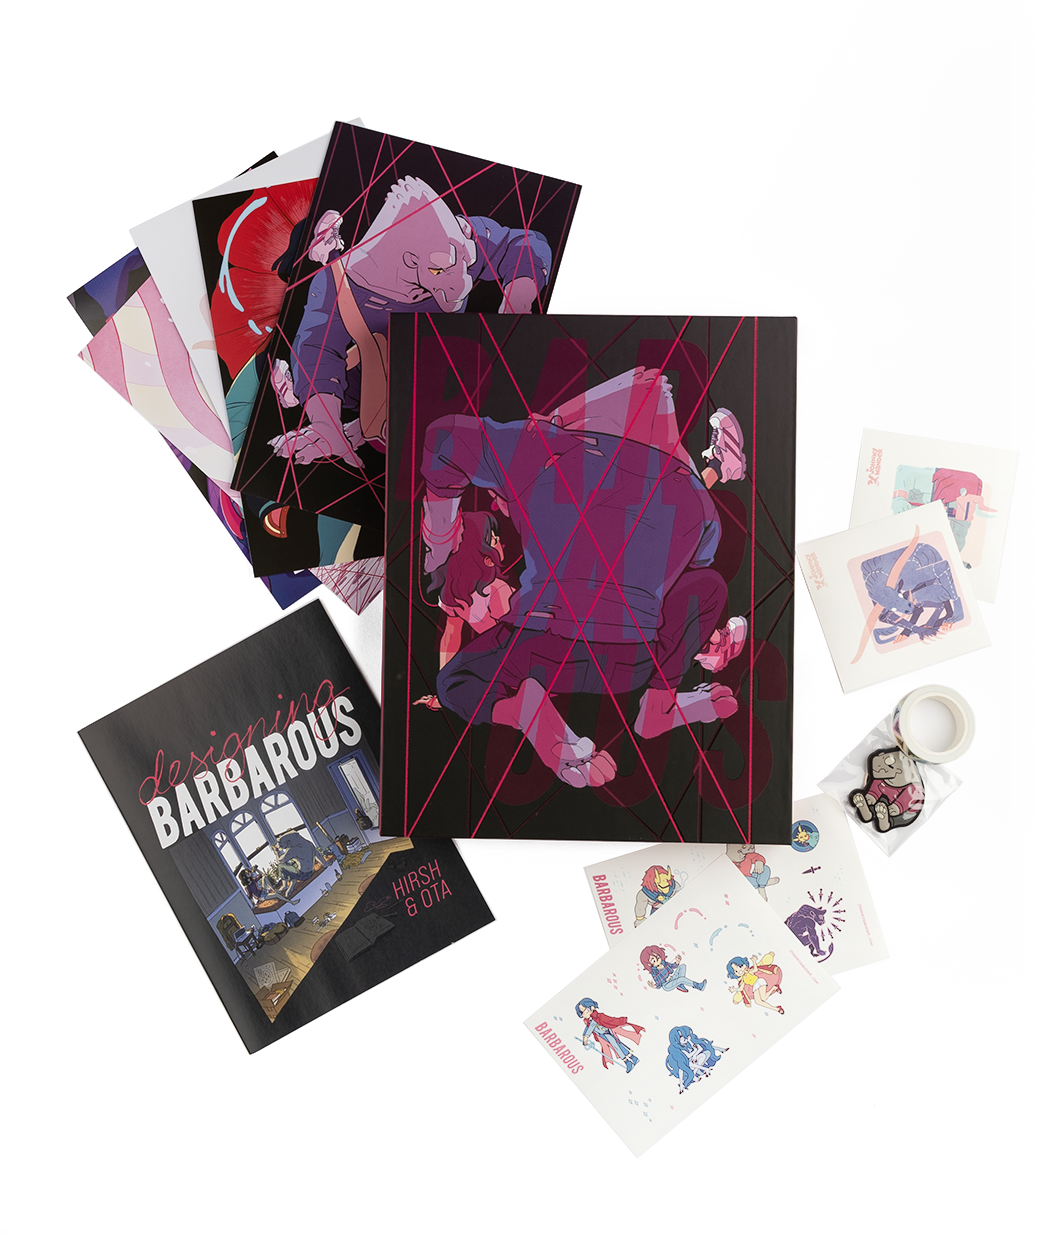 Barbarous Chapter 5 w/Slipcase Box of Extras